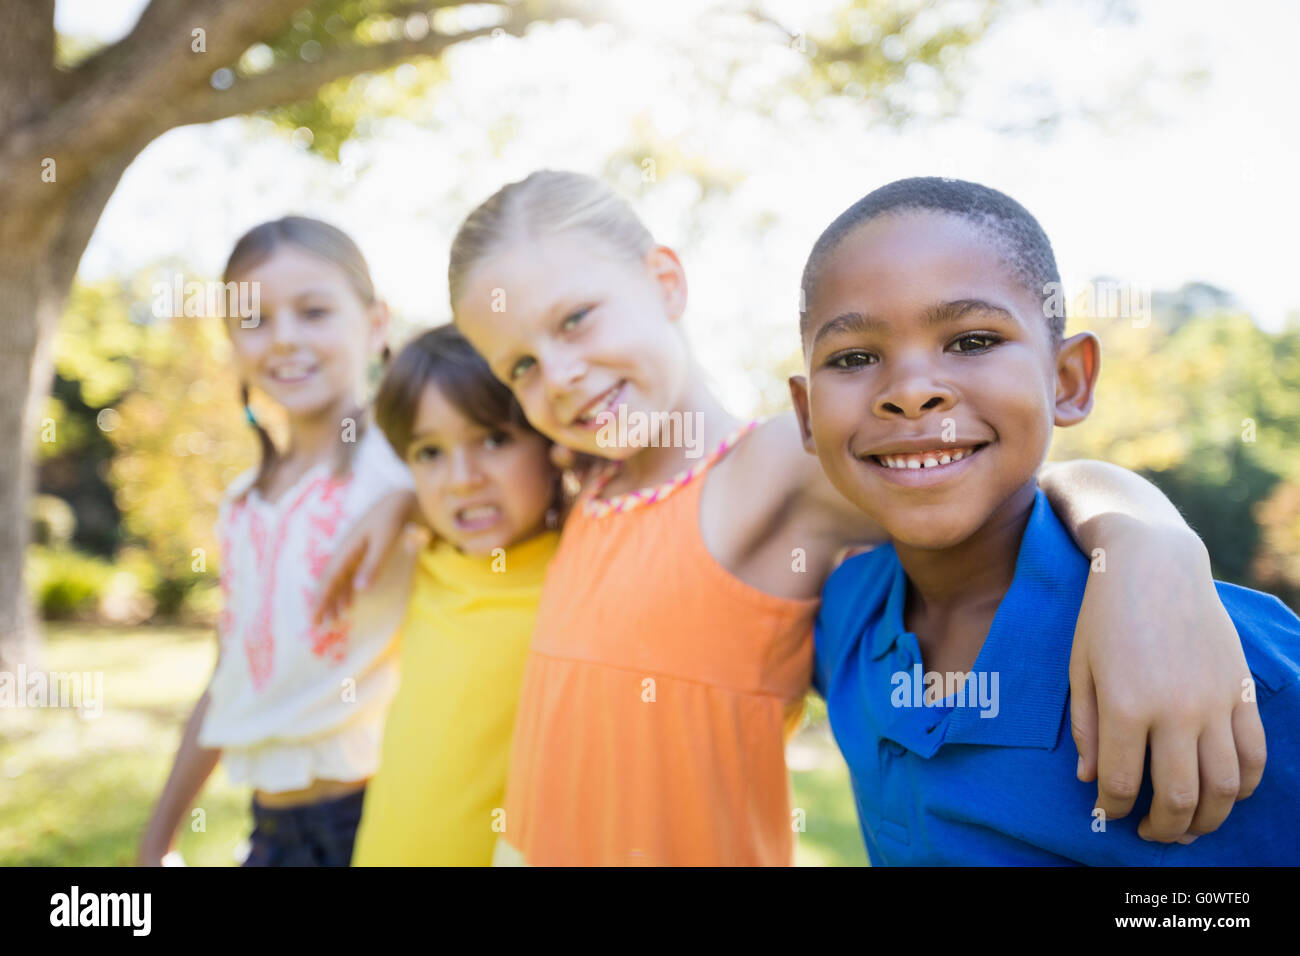 Children posing together for camera Stock Photo